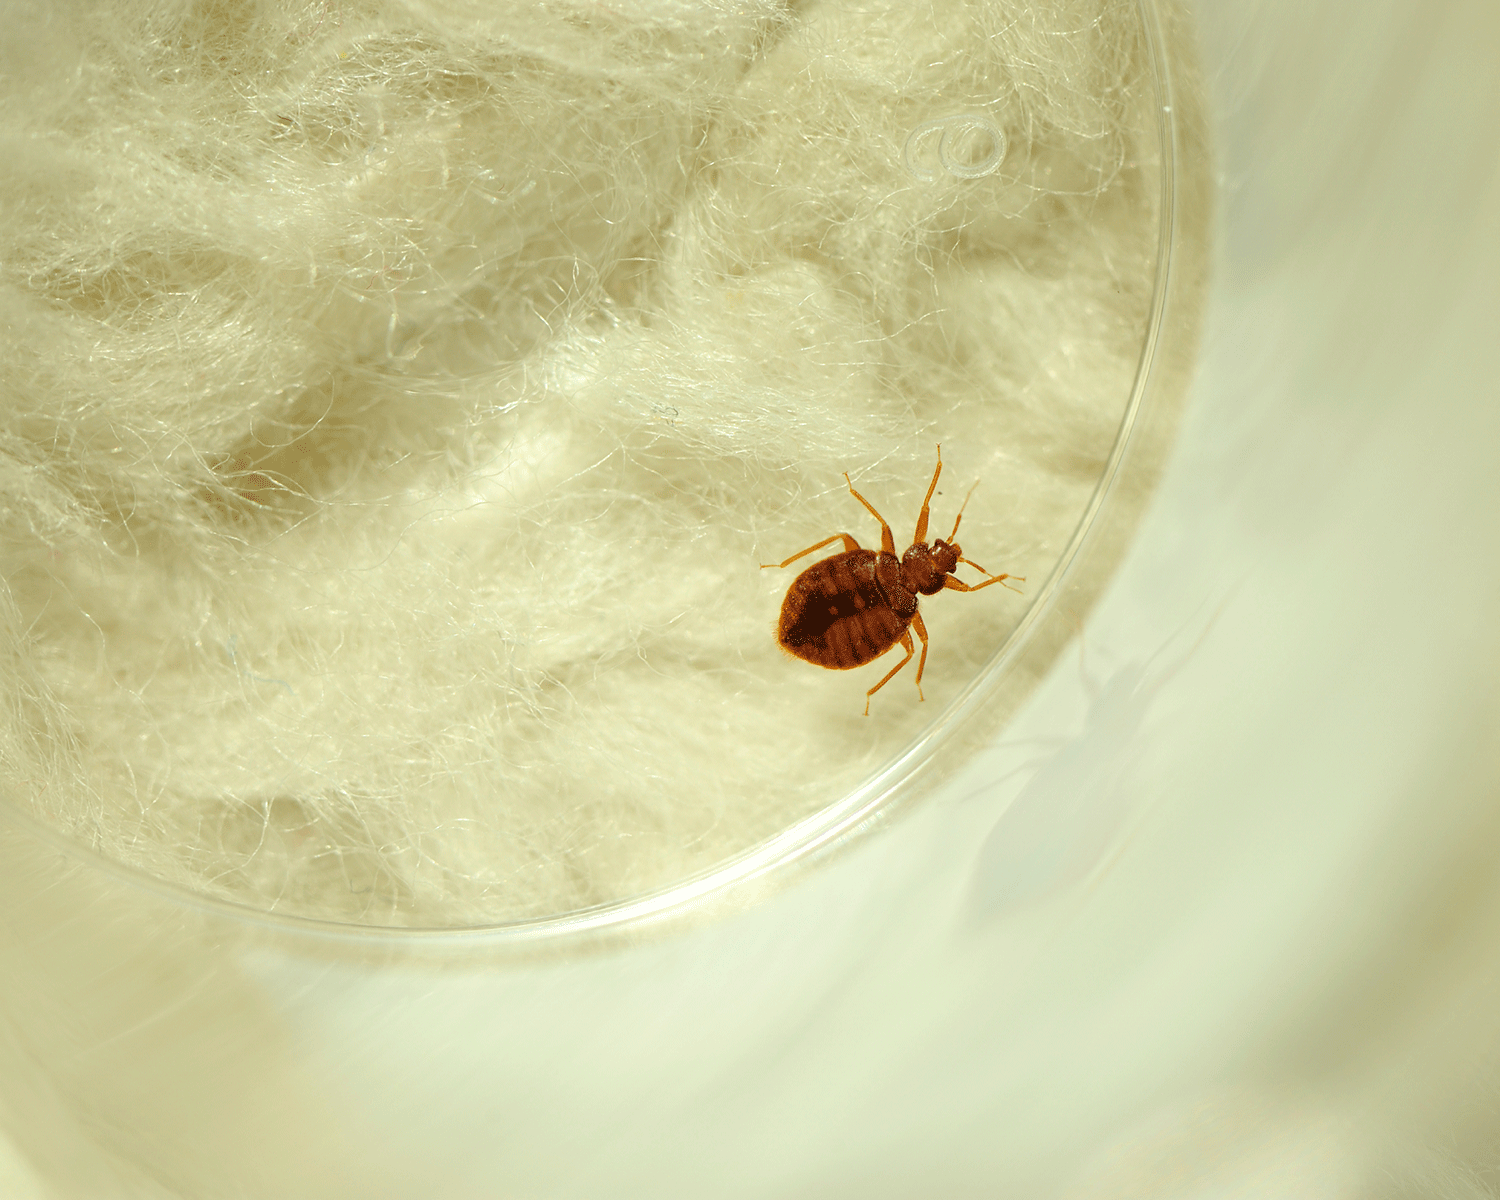 Bedbugs are about 5mm long and visible to the naked eye